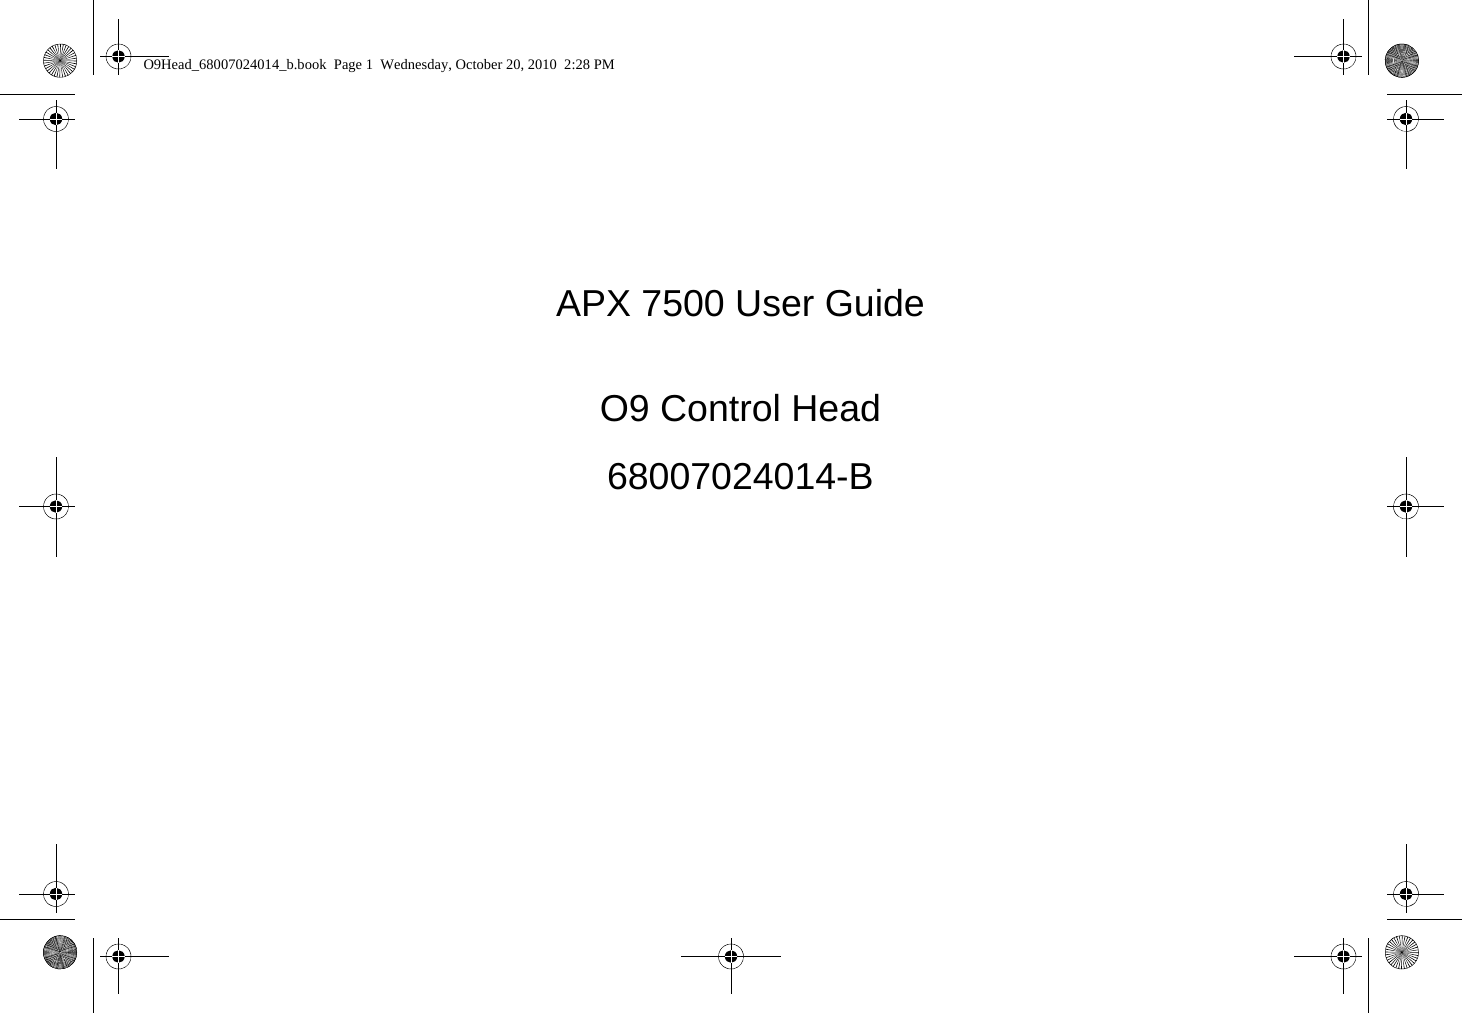 APX 7500 User GuideO9 Control Head68007024014-BO9Head_68007024014_b.book  Page 1  Wednesday, October 20, 2010  2:28 PM